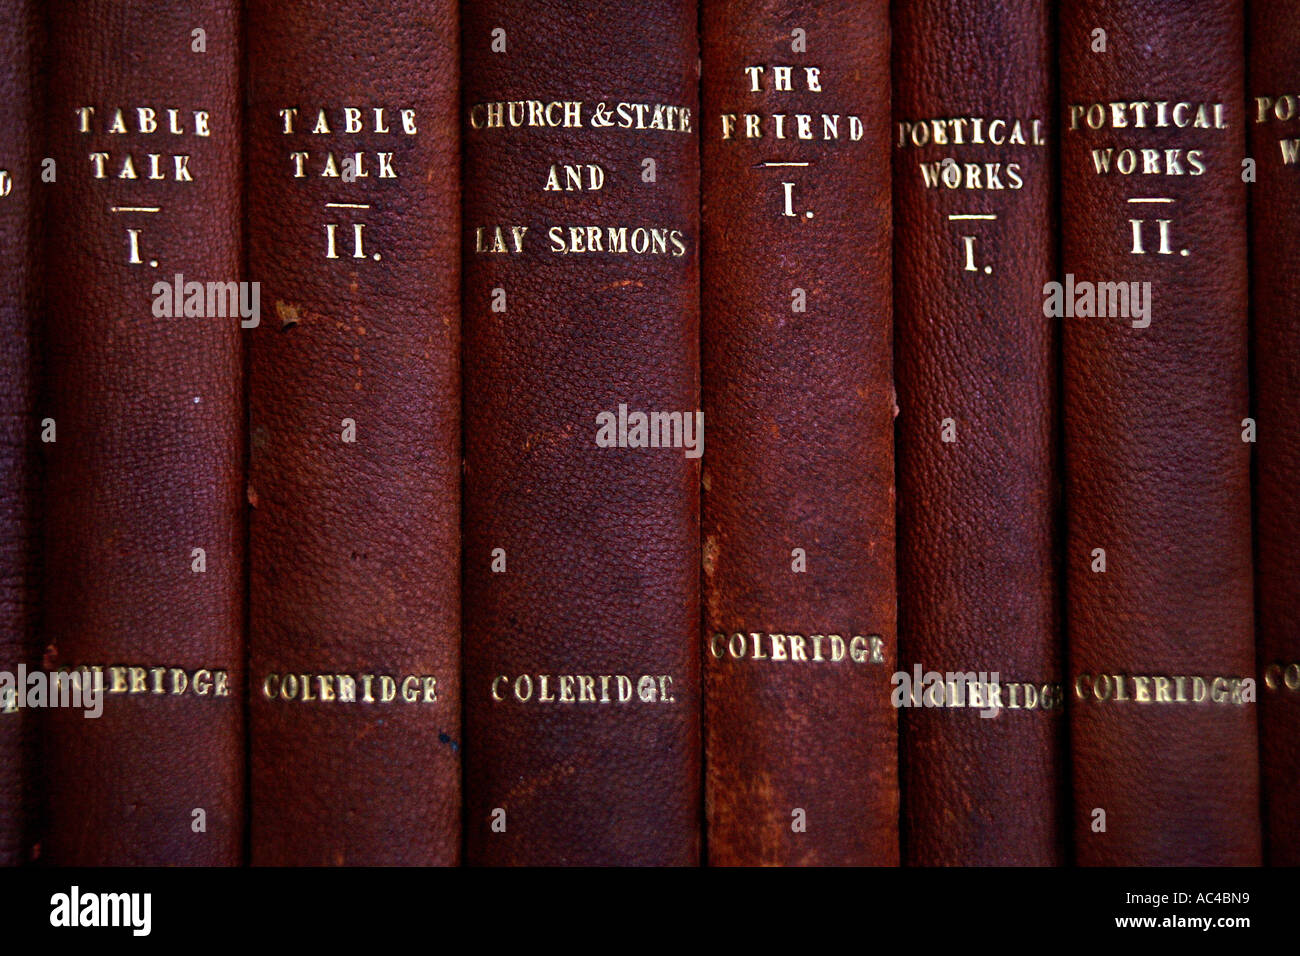 Leather bound copies of Coleridge's work on the bookshelves of the Library at The Chanter's House, Ottery St Mary in Devon UK Stock Photo